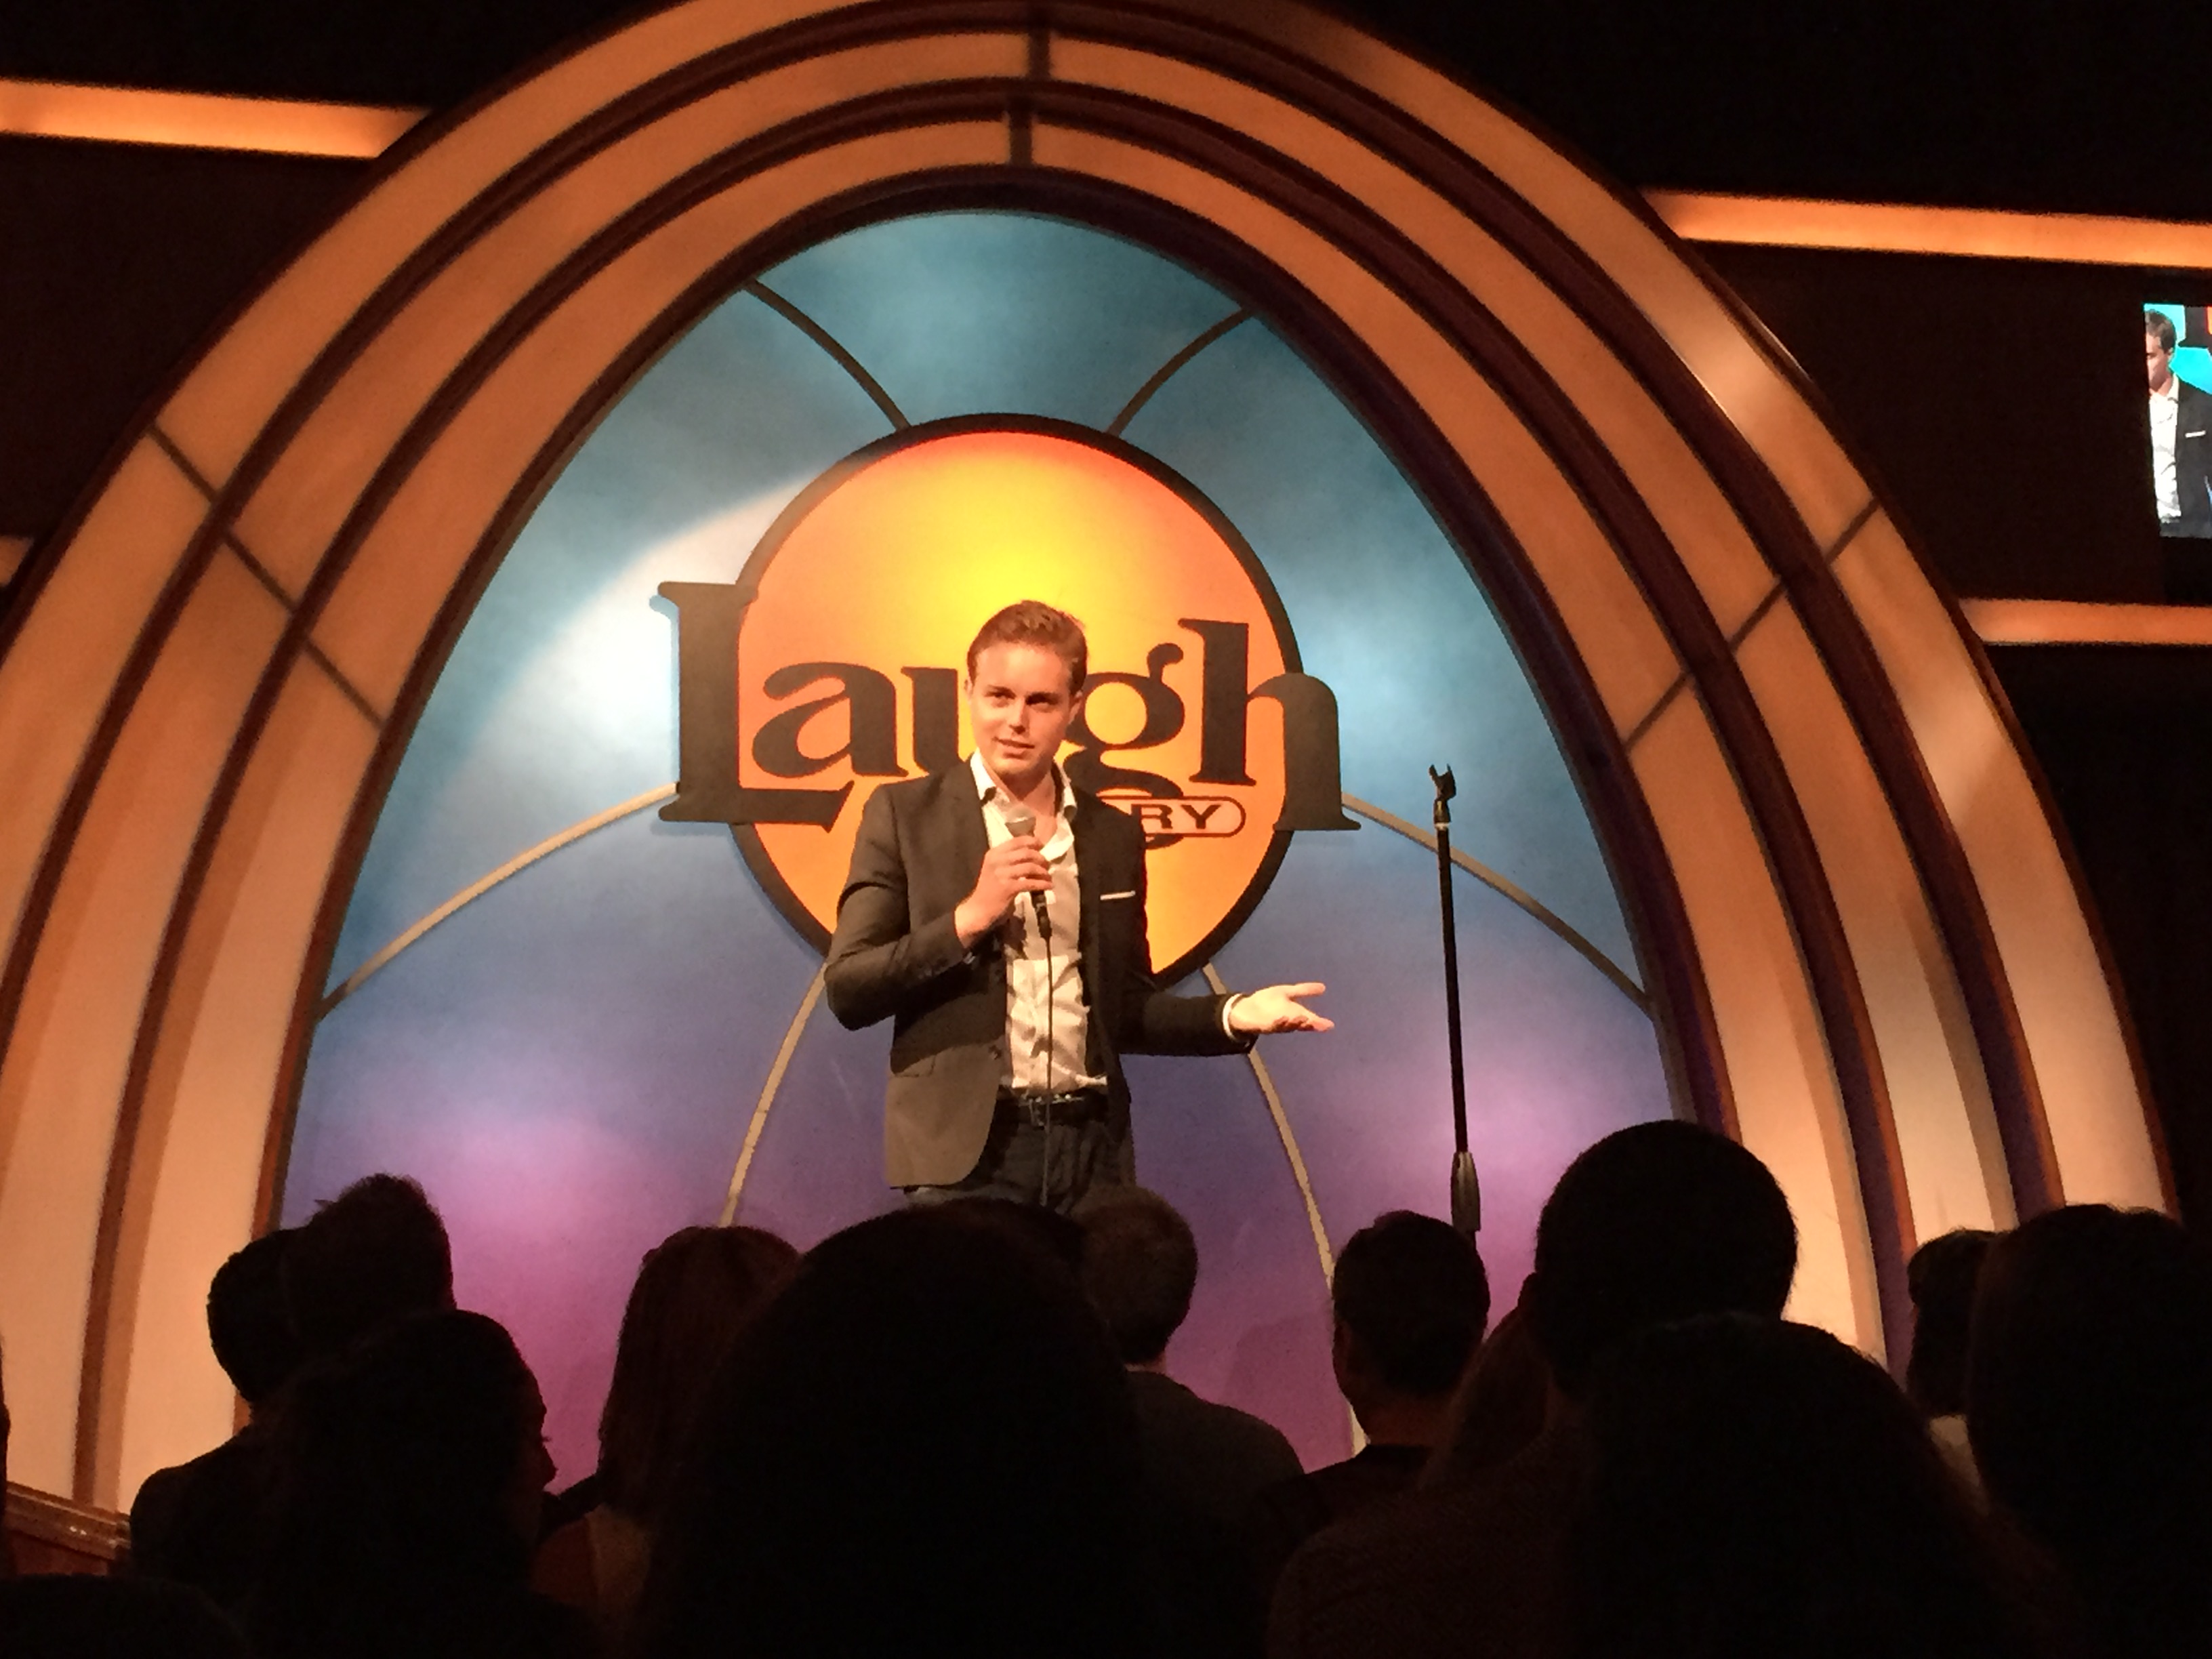 Jon Hartley performing at The Laugh Factory in West Hollywood